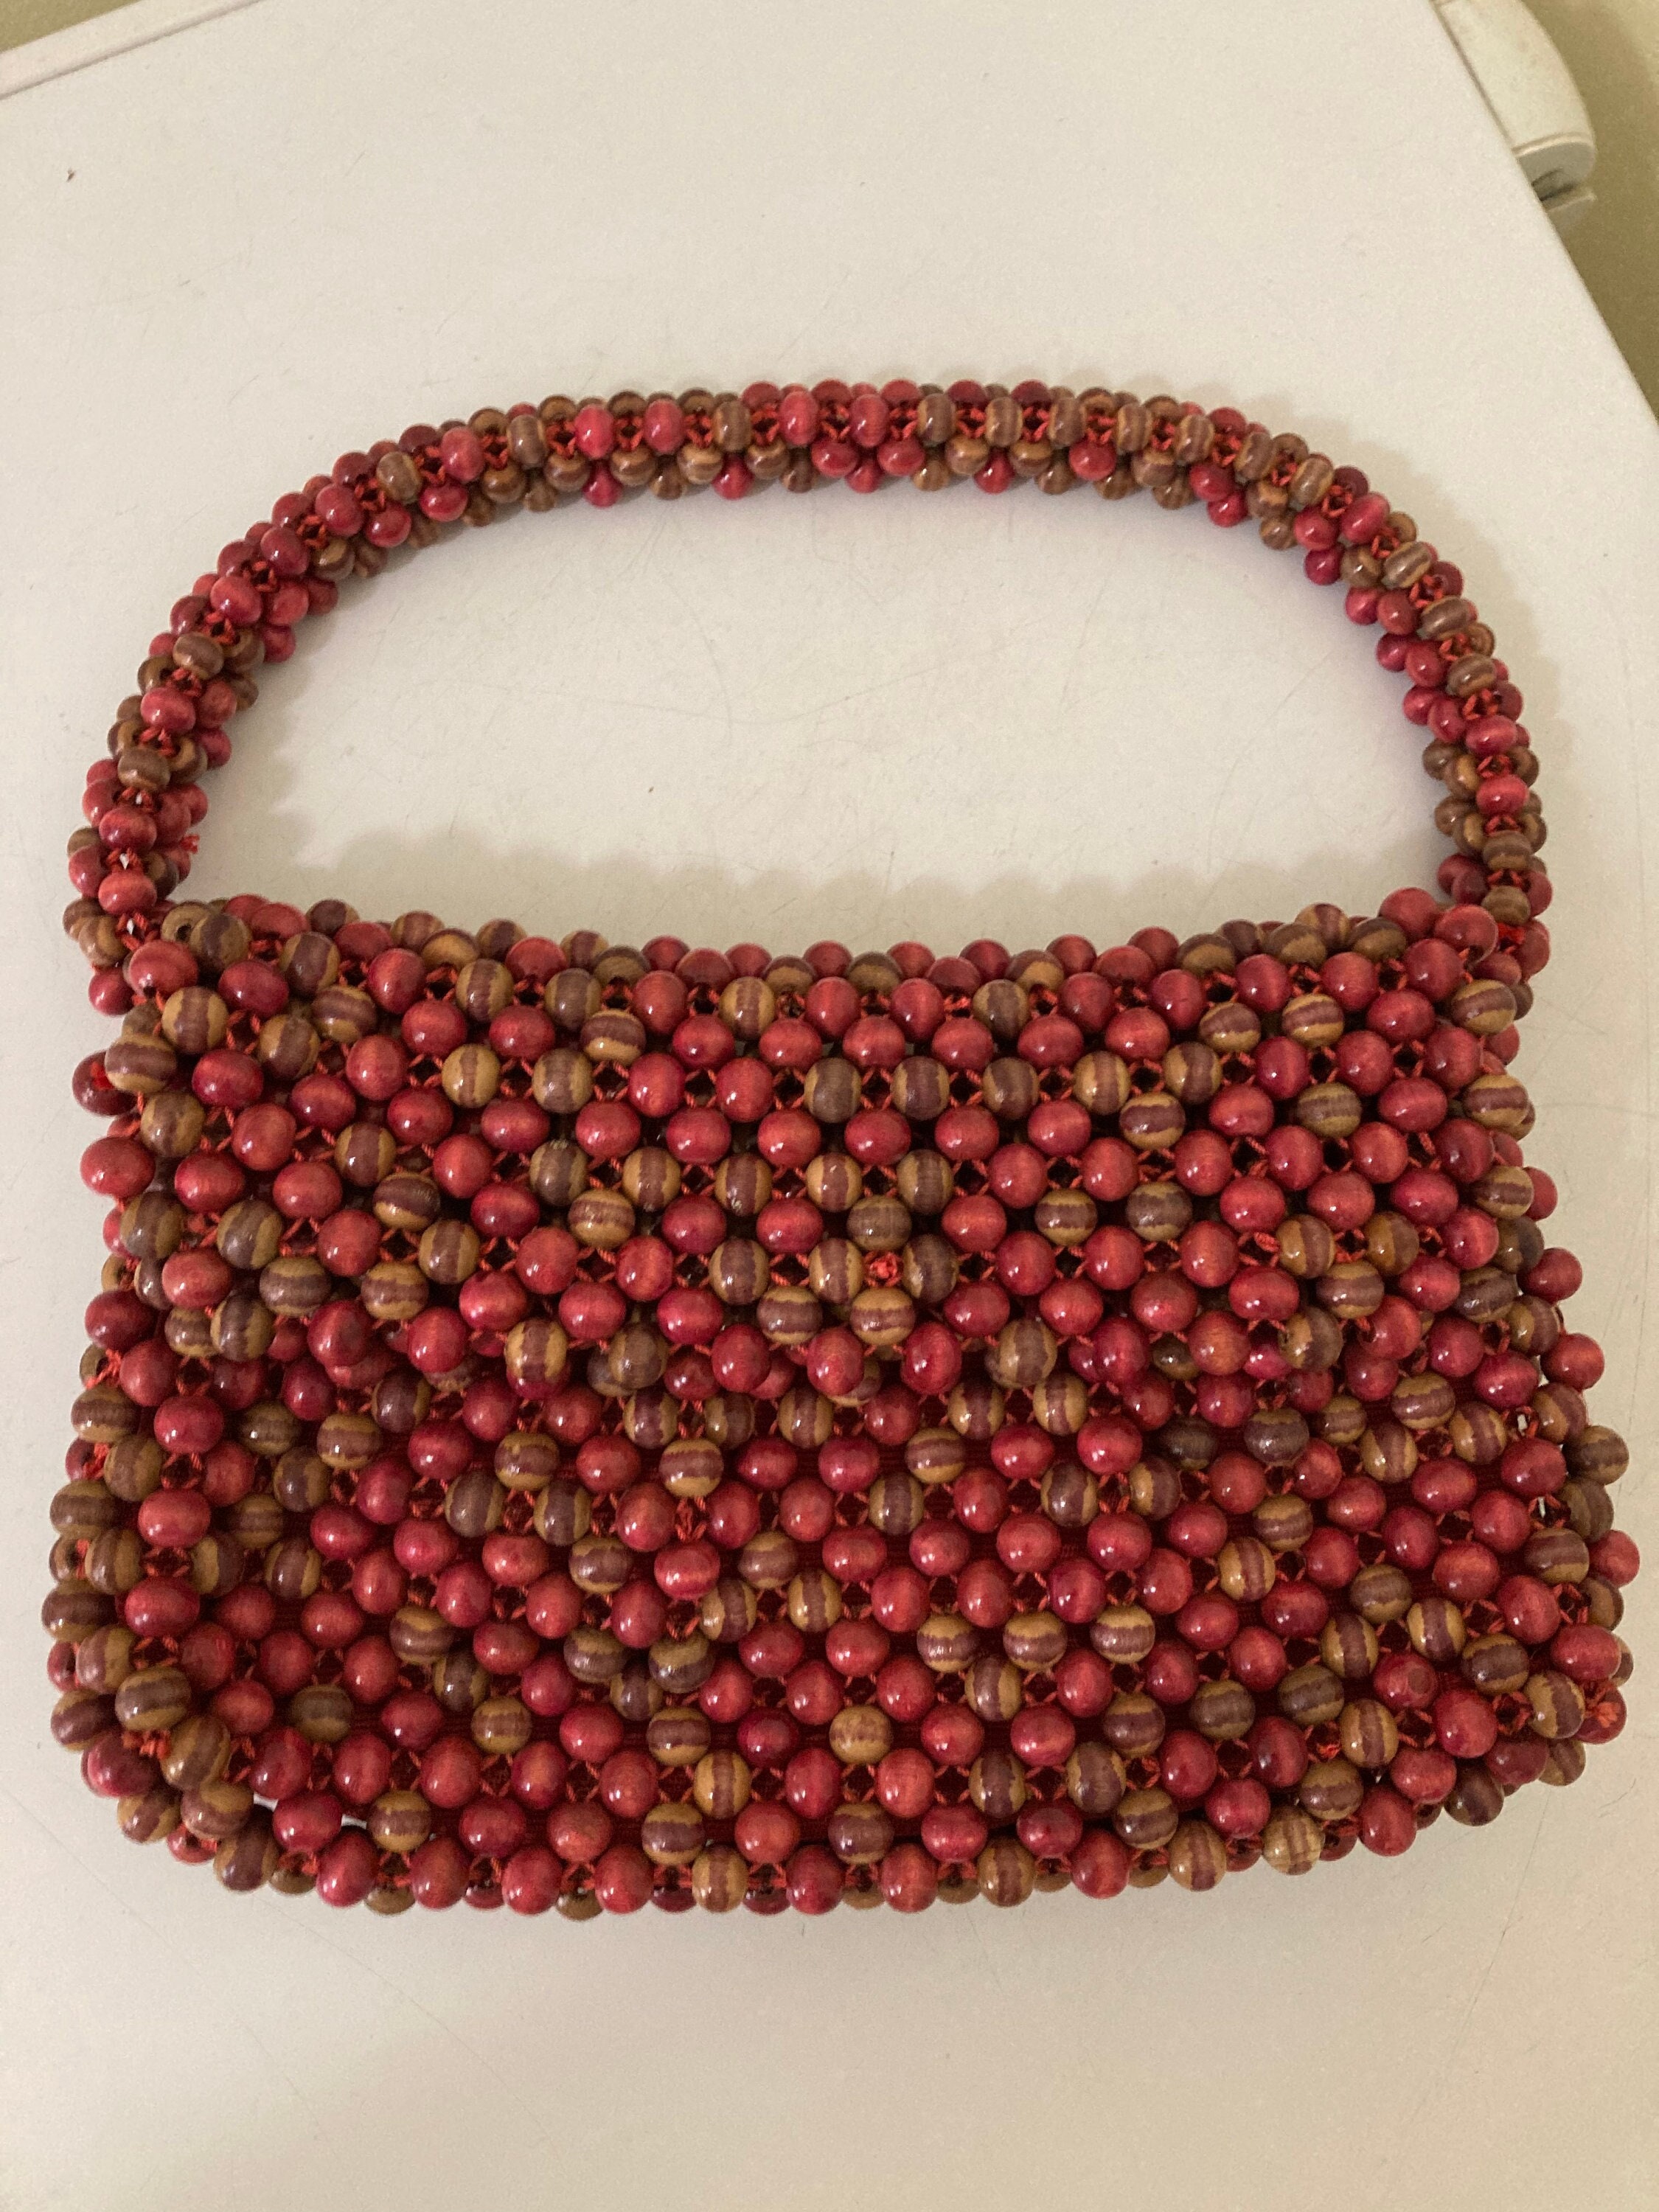 Vintage Colorful Wooden Bead Purse with Long Fringe - Ruby Lane